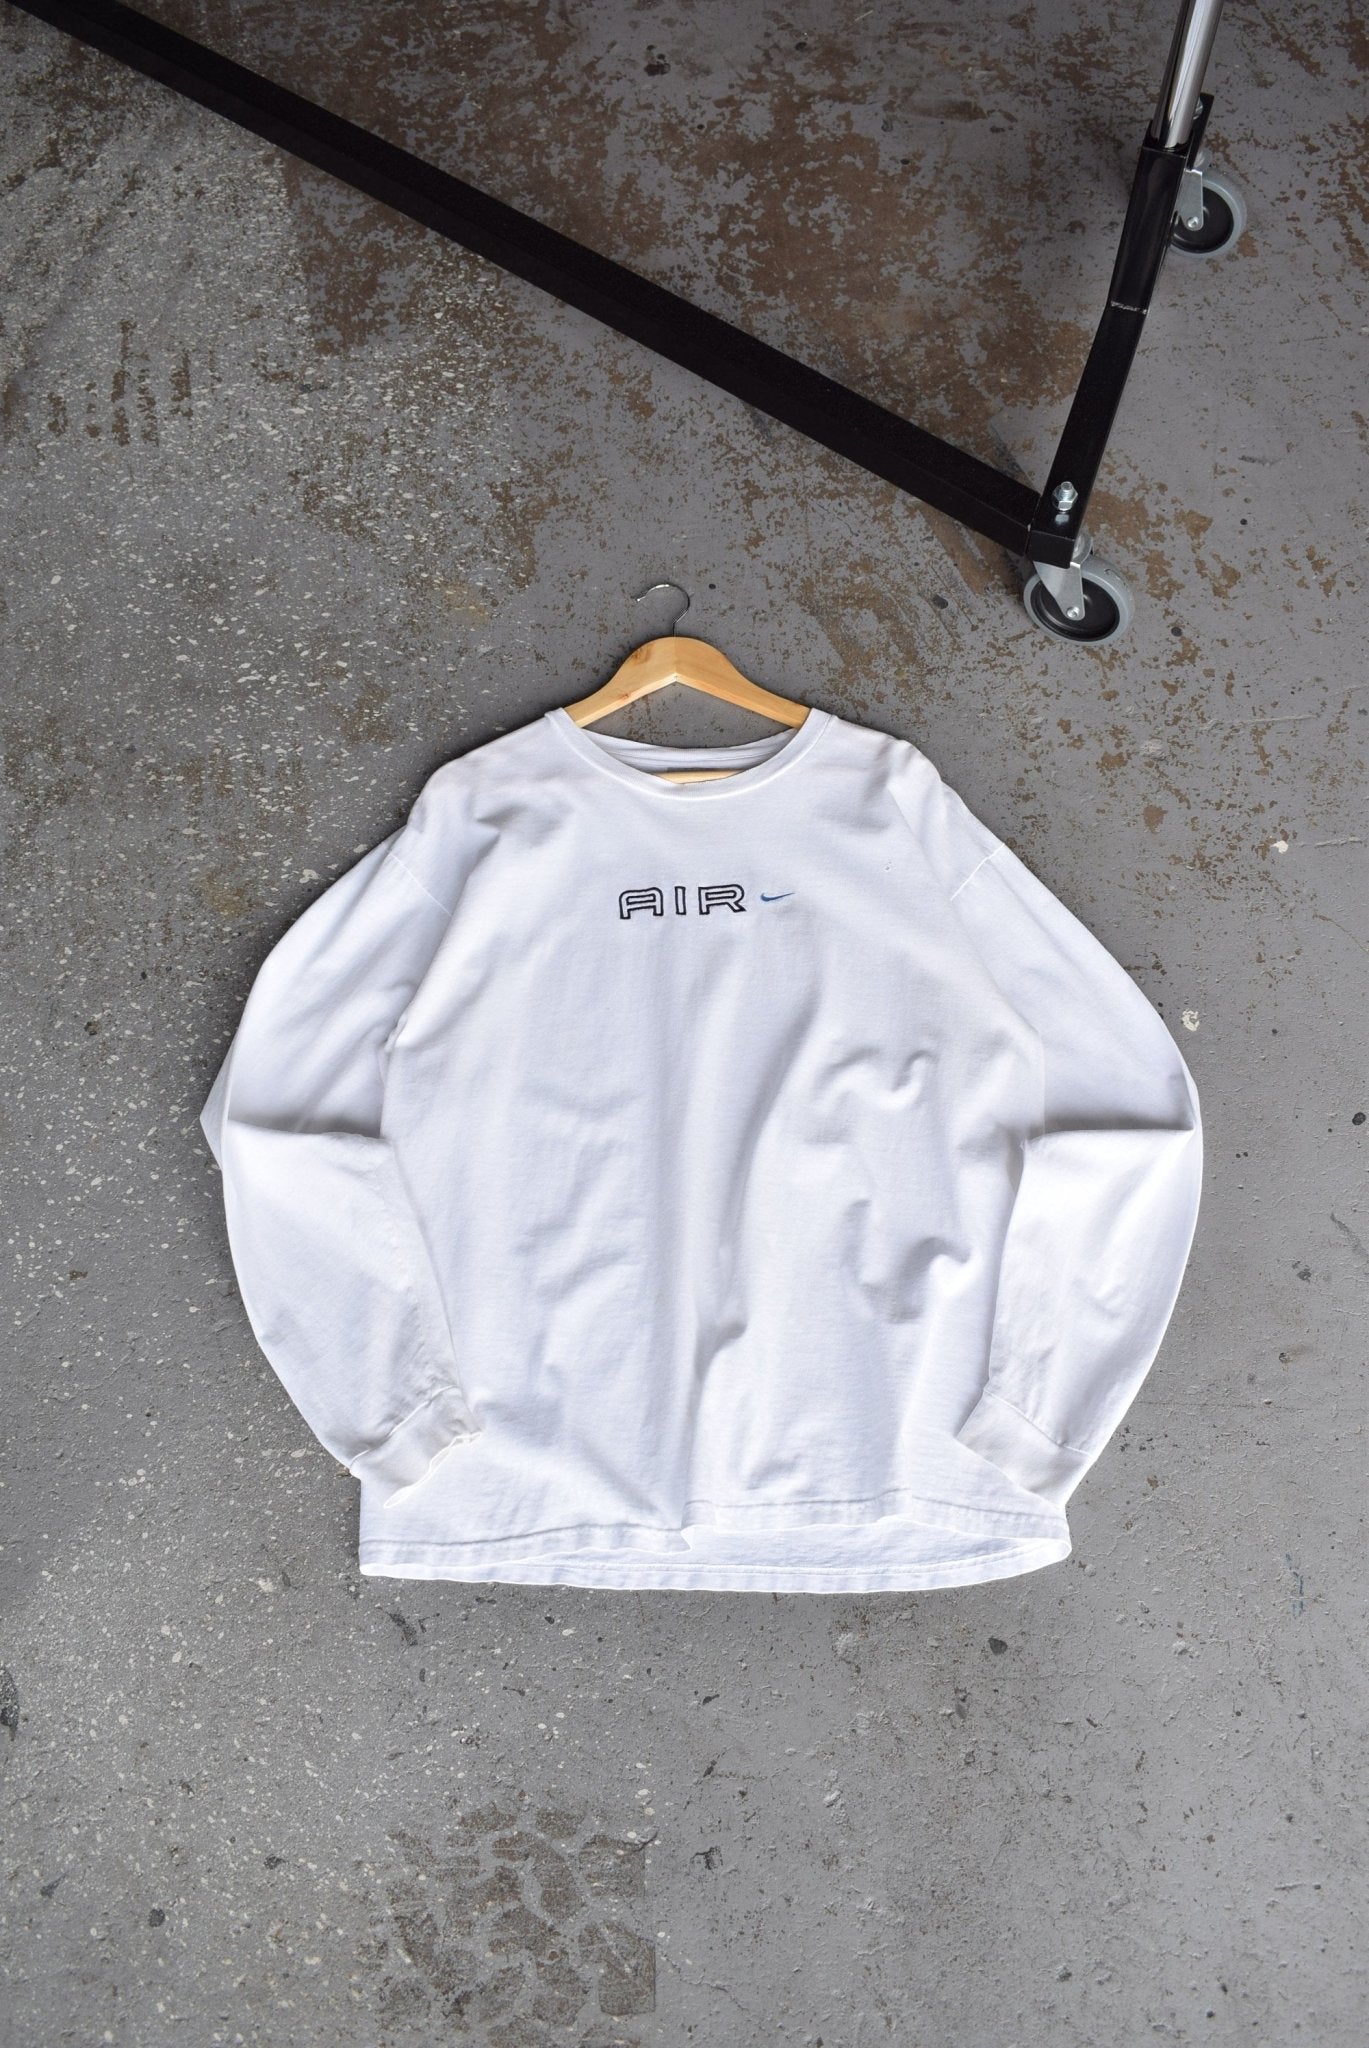 Vintage Nike Air Embroidered Long Sleeve Tee (L) - Retrospective Store